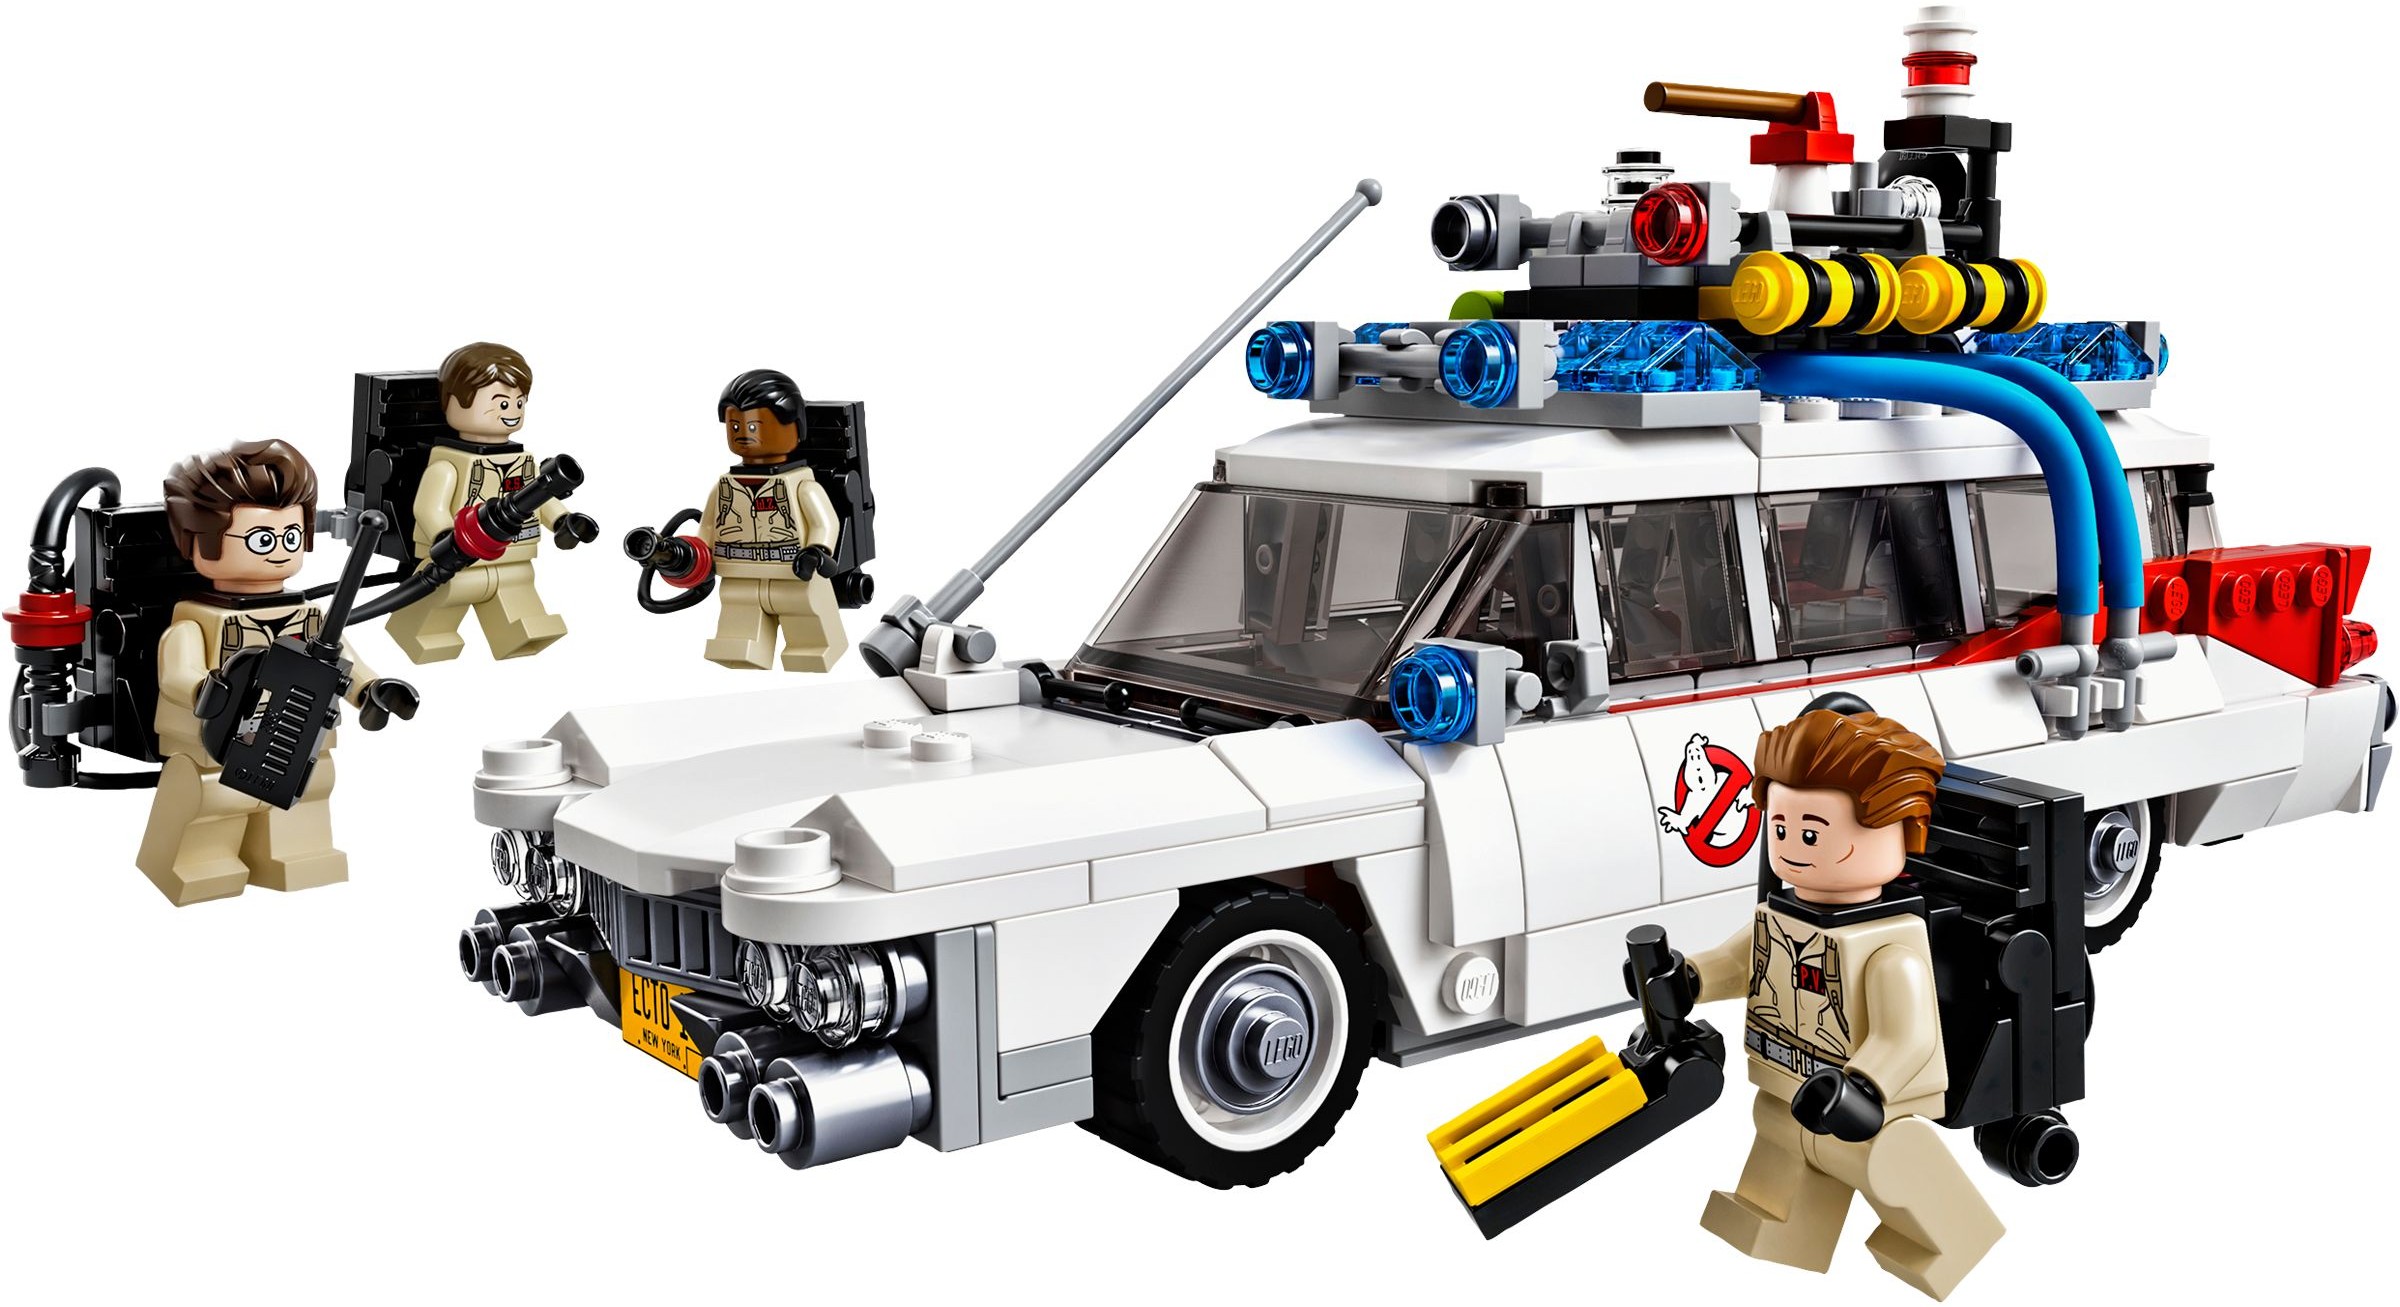 Review: 21108 Ghostbusters | Brickset: LEGO set guide and database